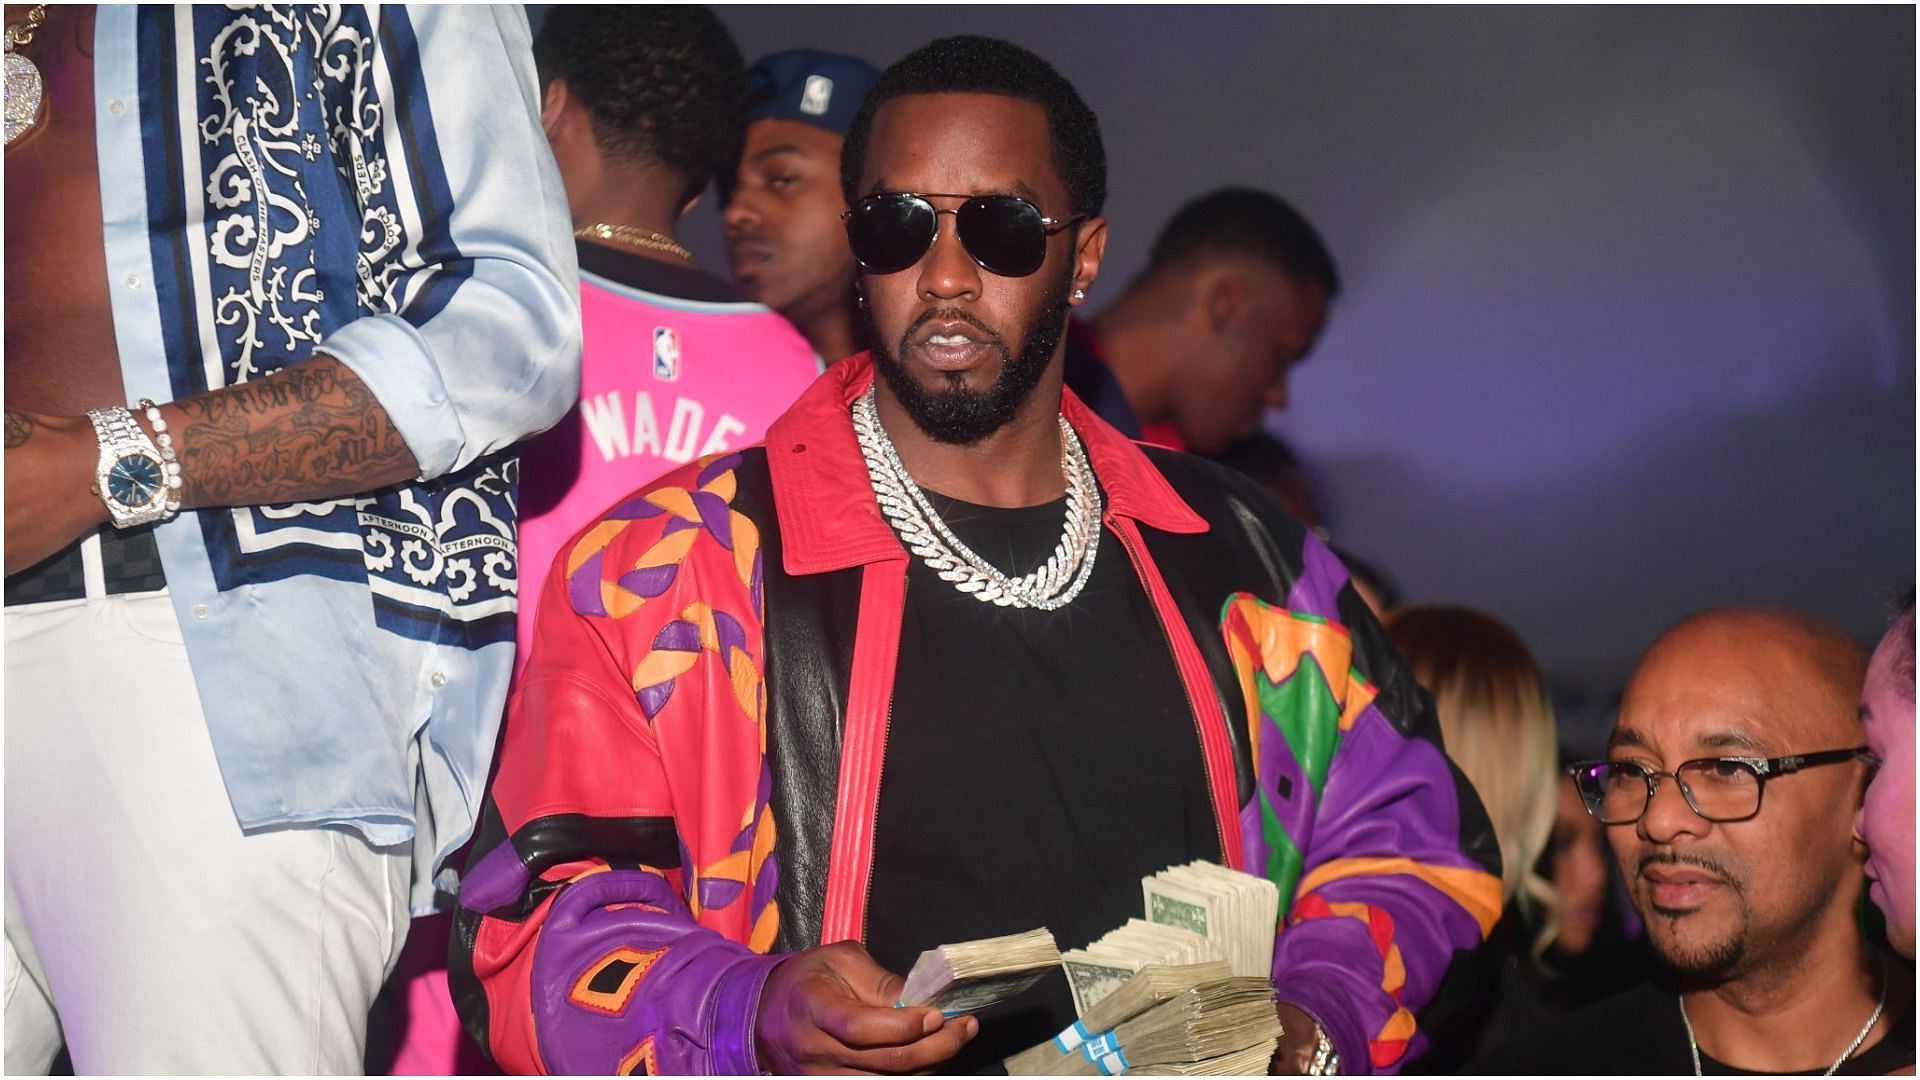 Sean Combs attends the Million Dollar Bowl (Image via Getty Images/Prince Williams)